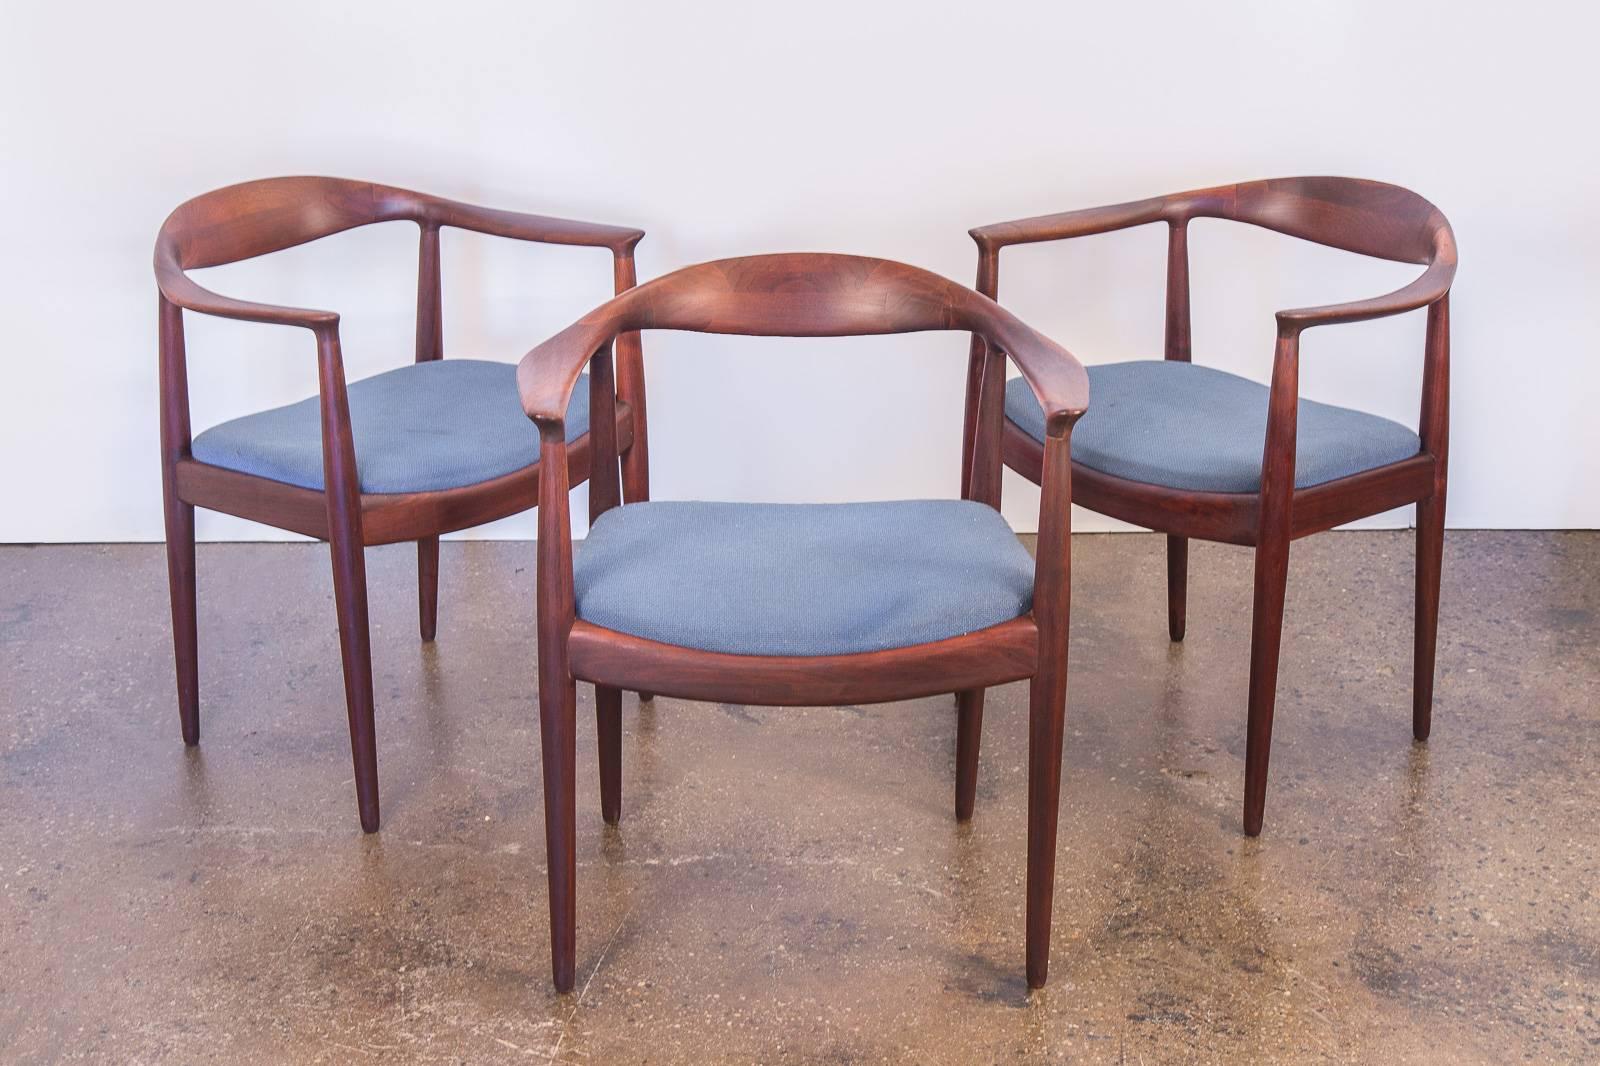 Set of six dining armchairs for Edward Axel Roffman Associates. An attractive set in the likeness of Hans Wegner's iconic Round chair. Sculpted walnut and stained wooden frames are elegant and sturdy. All chairs have varying degrees of